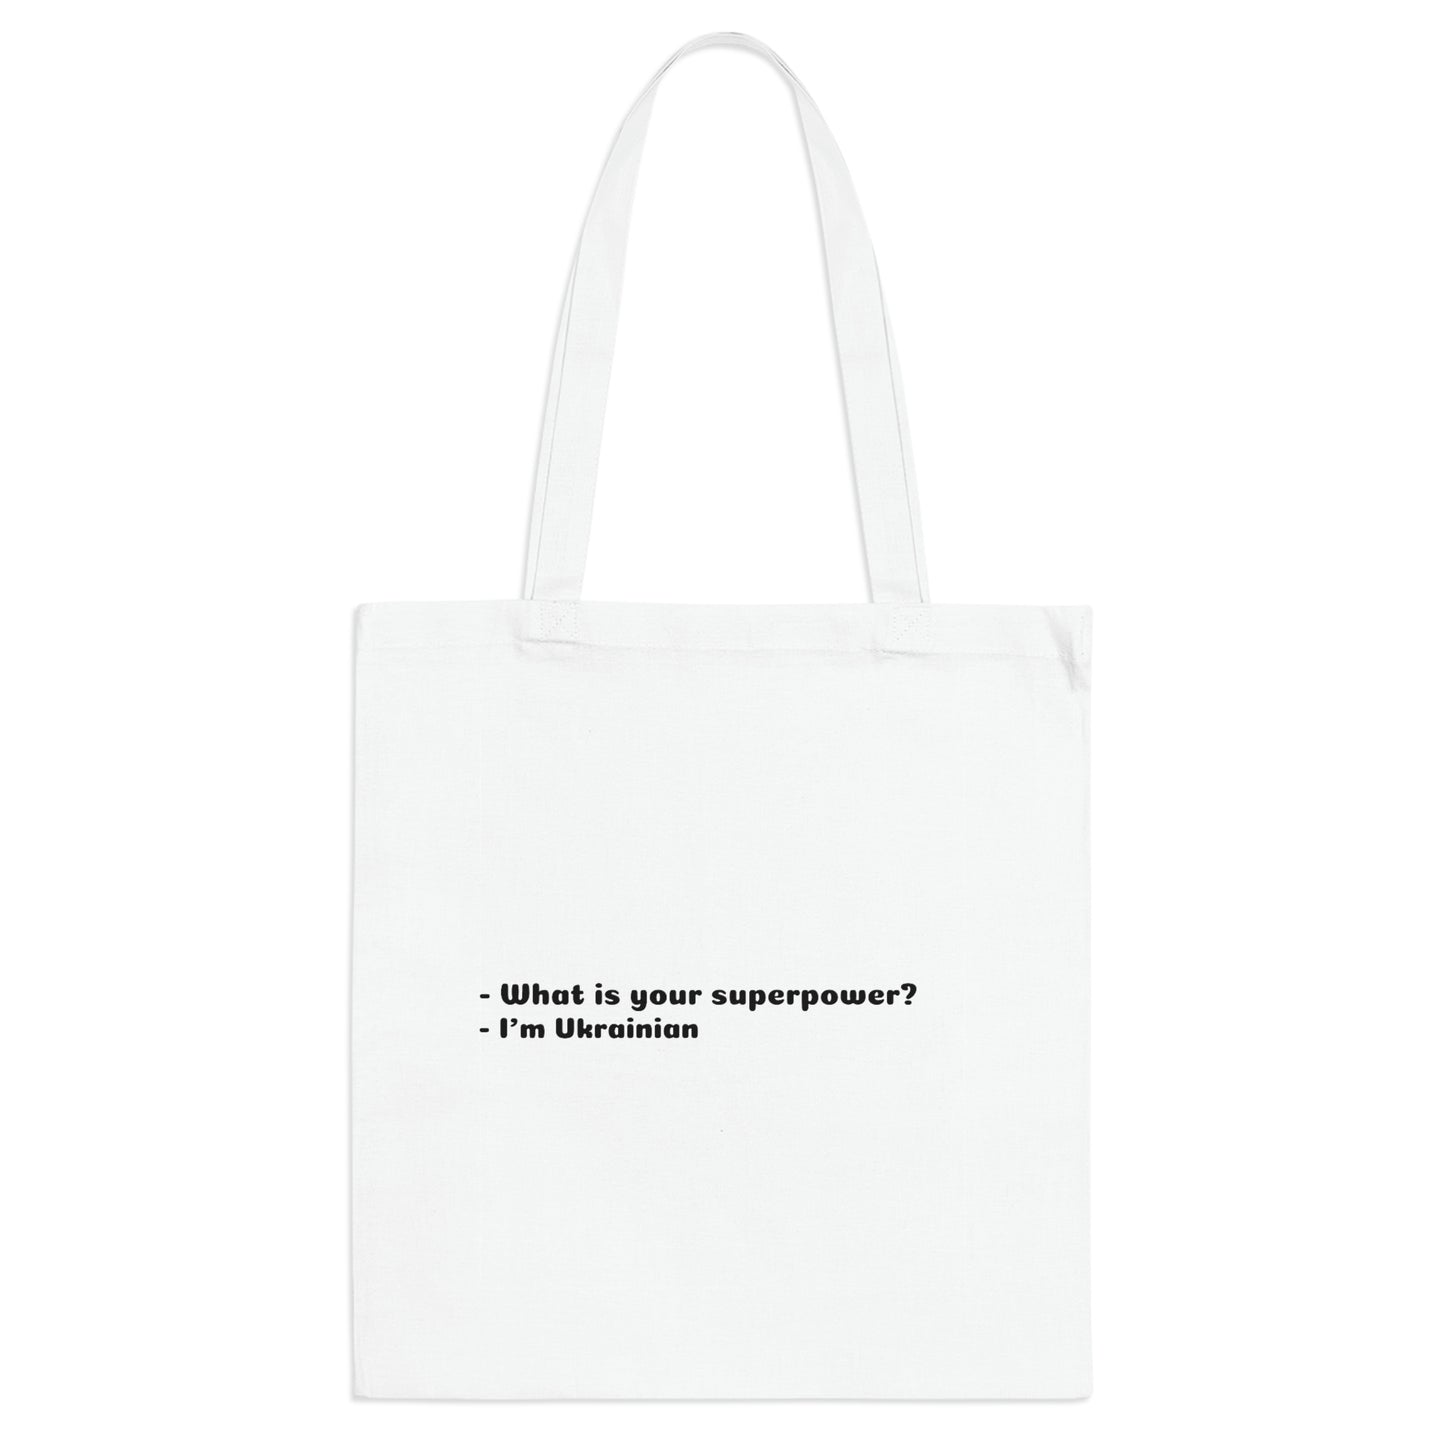 Superpower Tote Bag